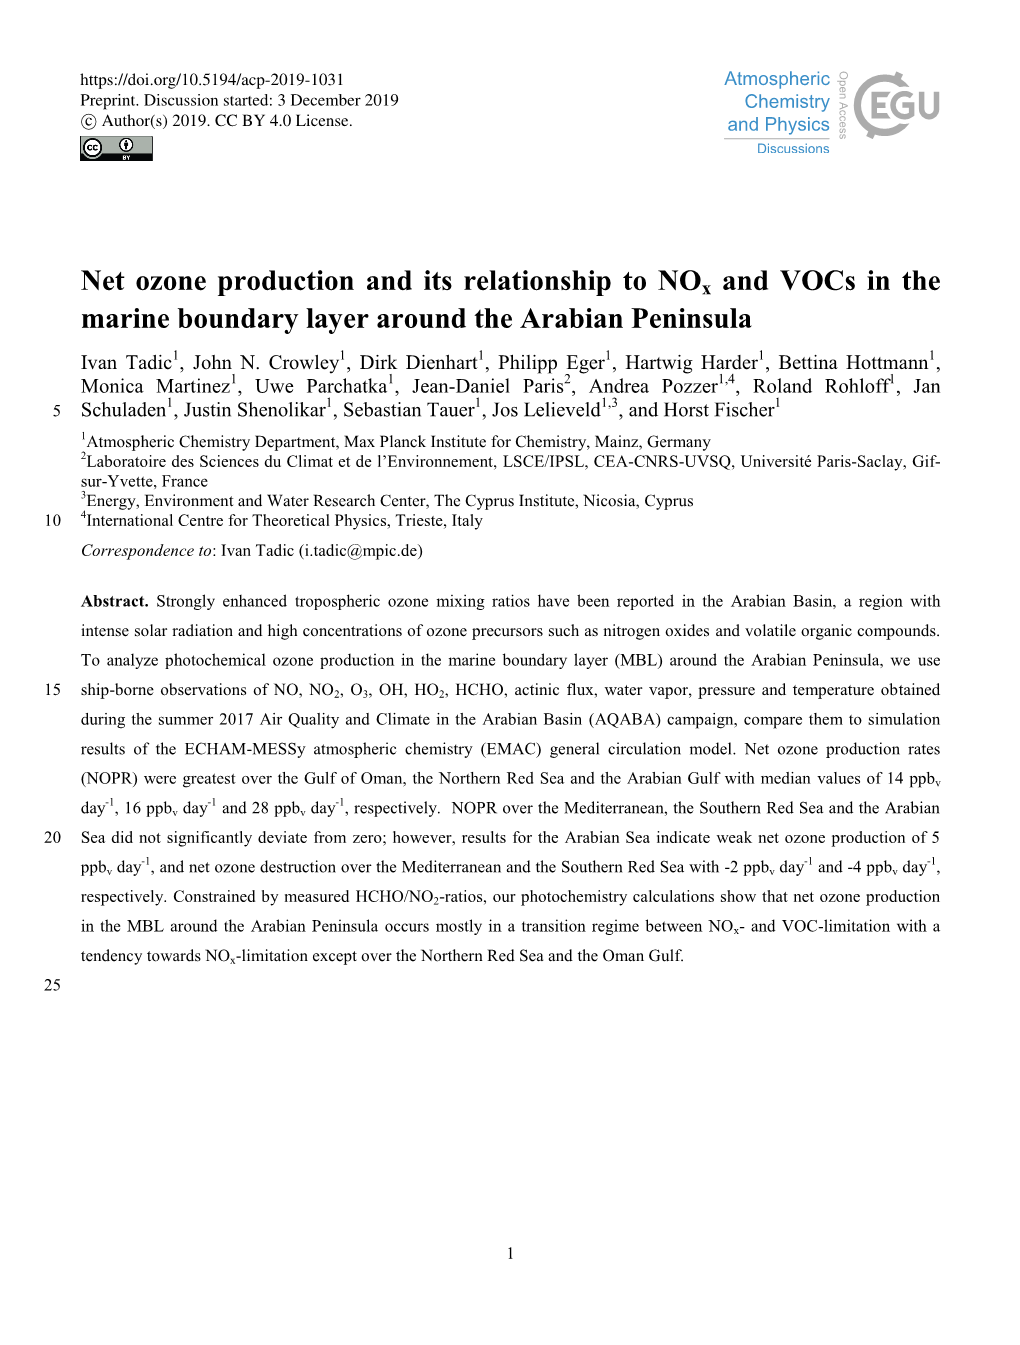 Net Ozone Production and Its Relationship to Nox and Vocs in the Marine Boundary Layer Around the Arabian Peninsula Ivan Tadic1, John N